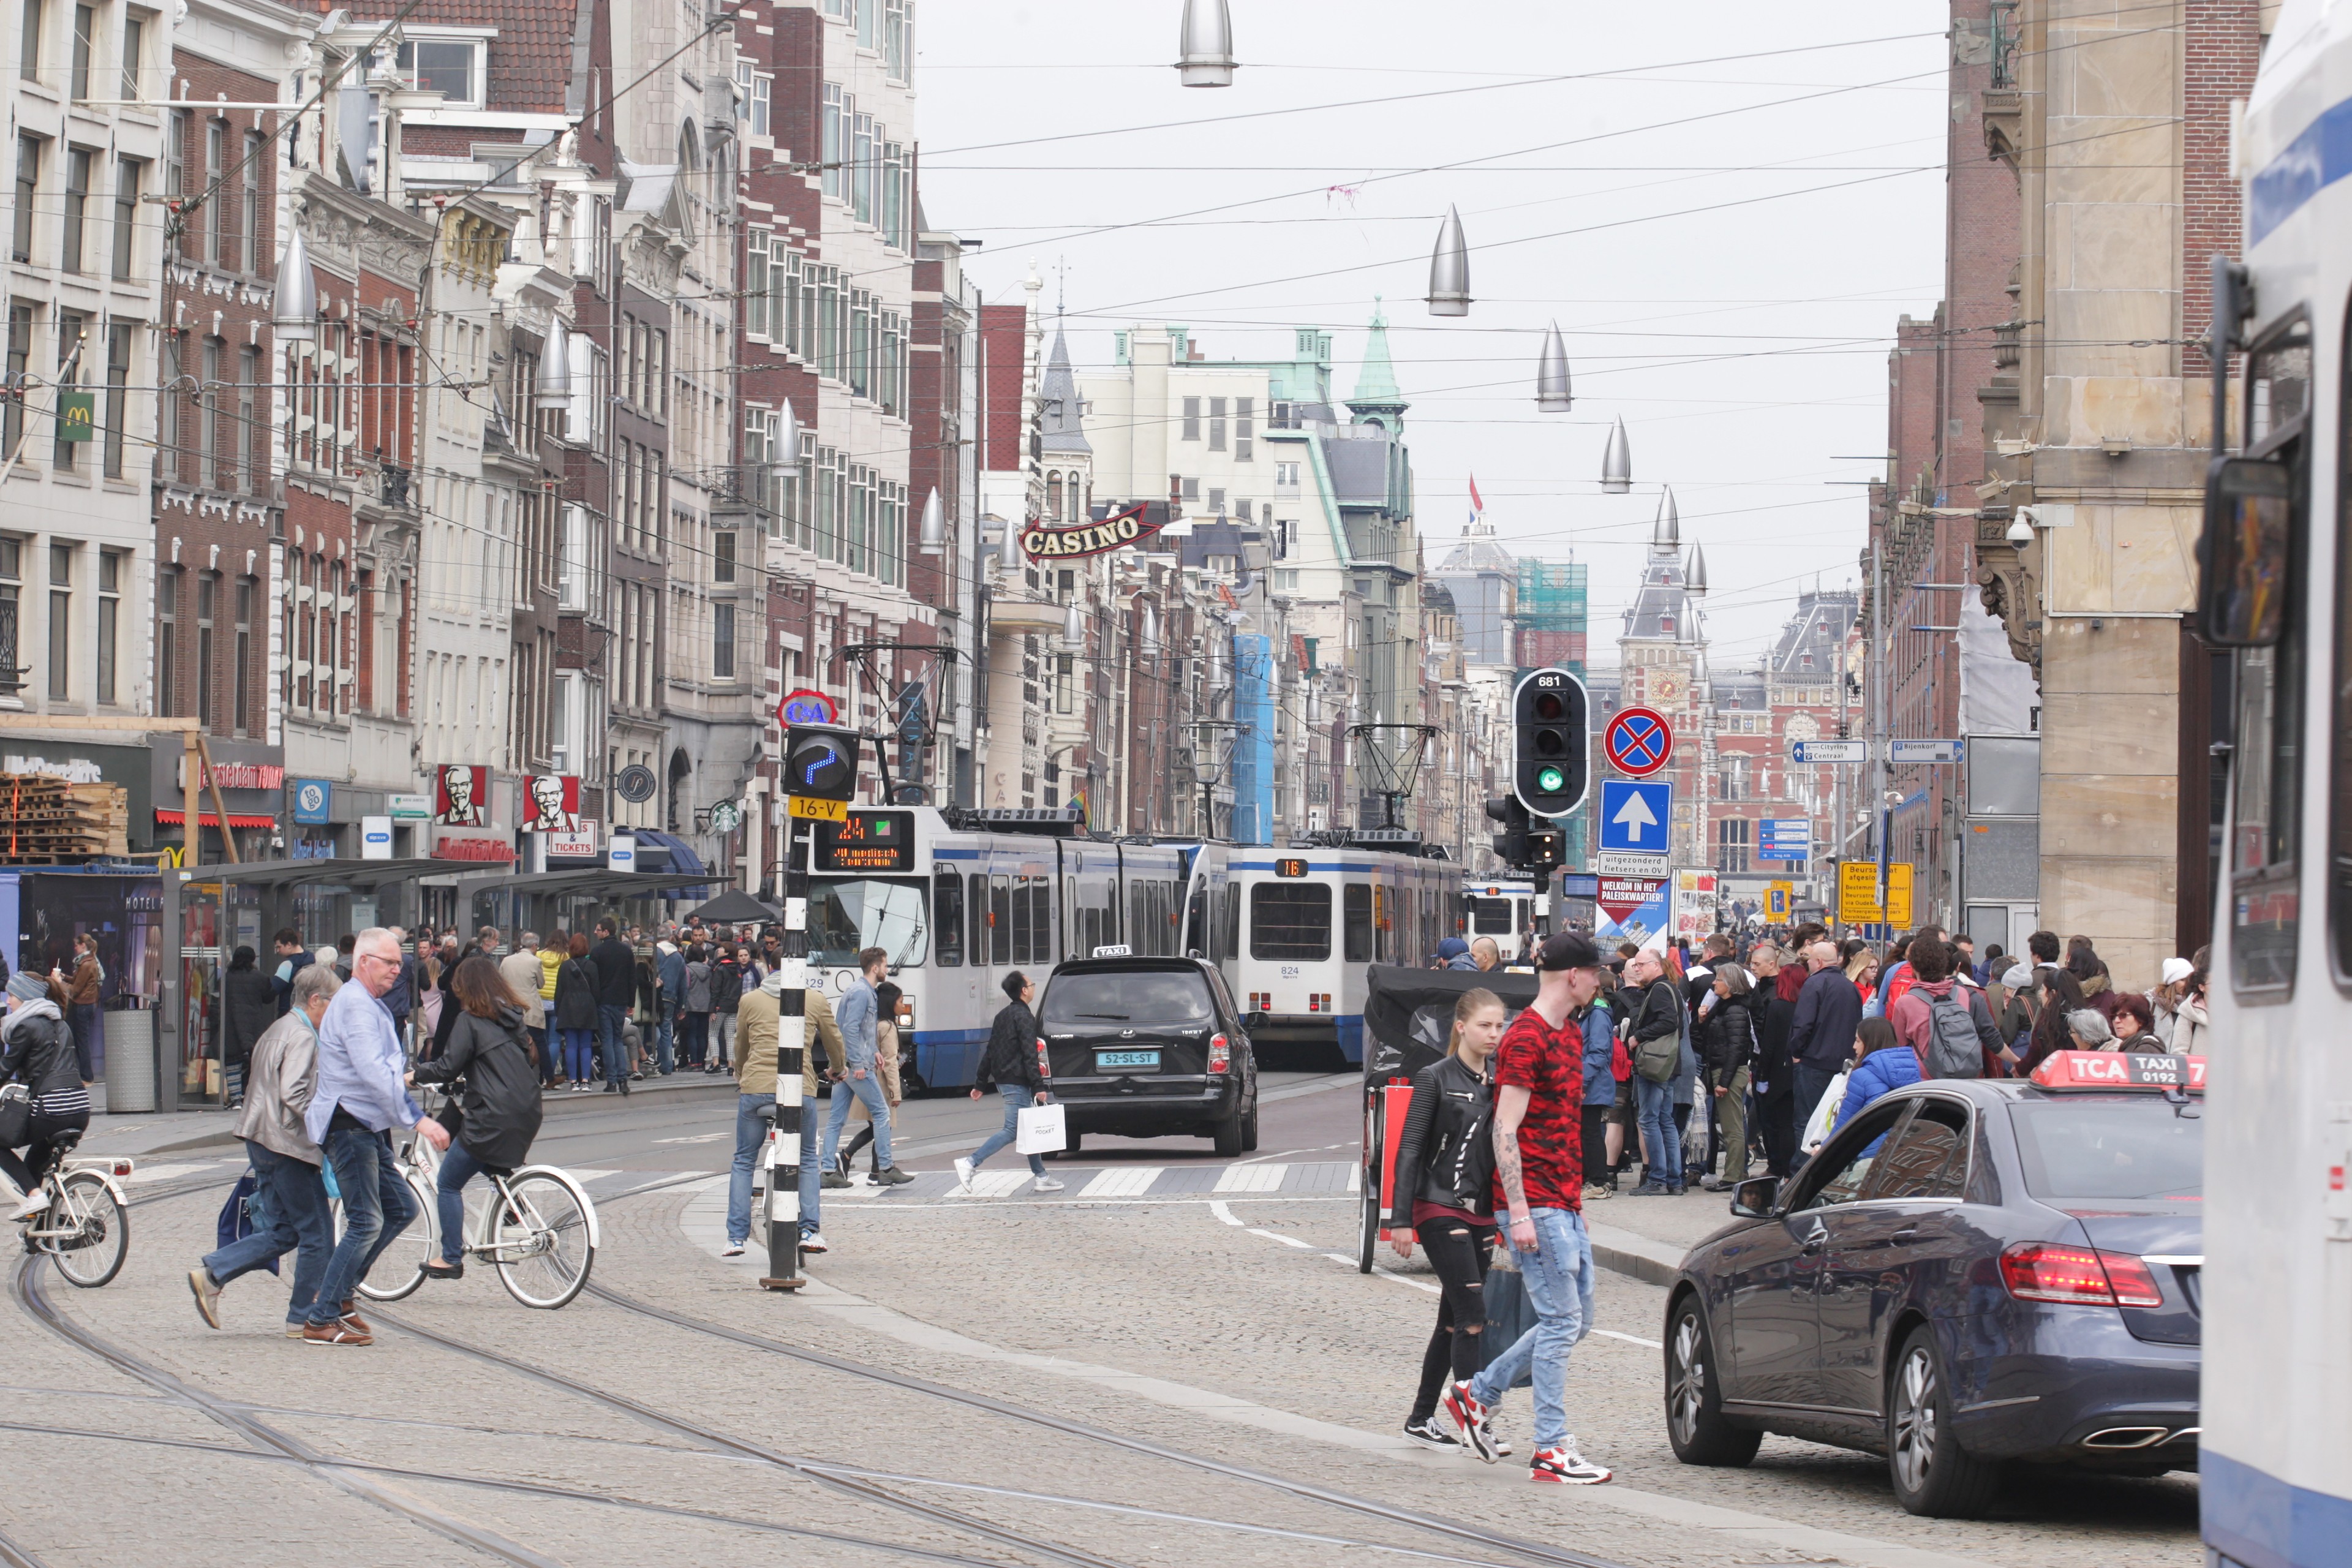 An image of an Amsterdam street showing cars, taxis, trams, pedestrians and cyclists.